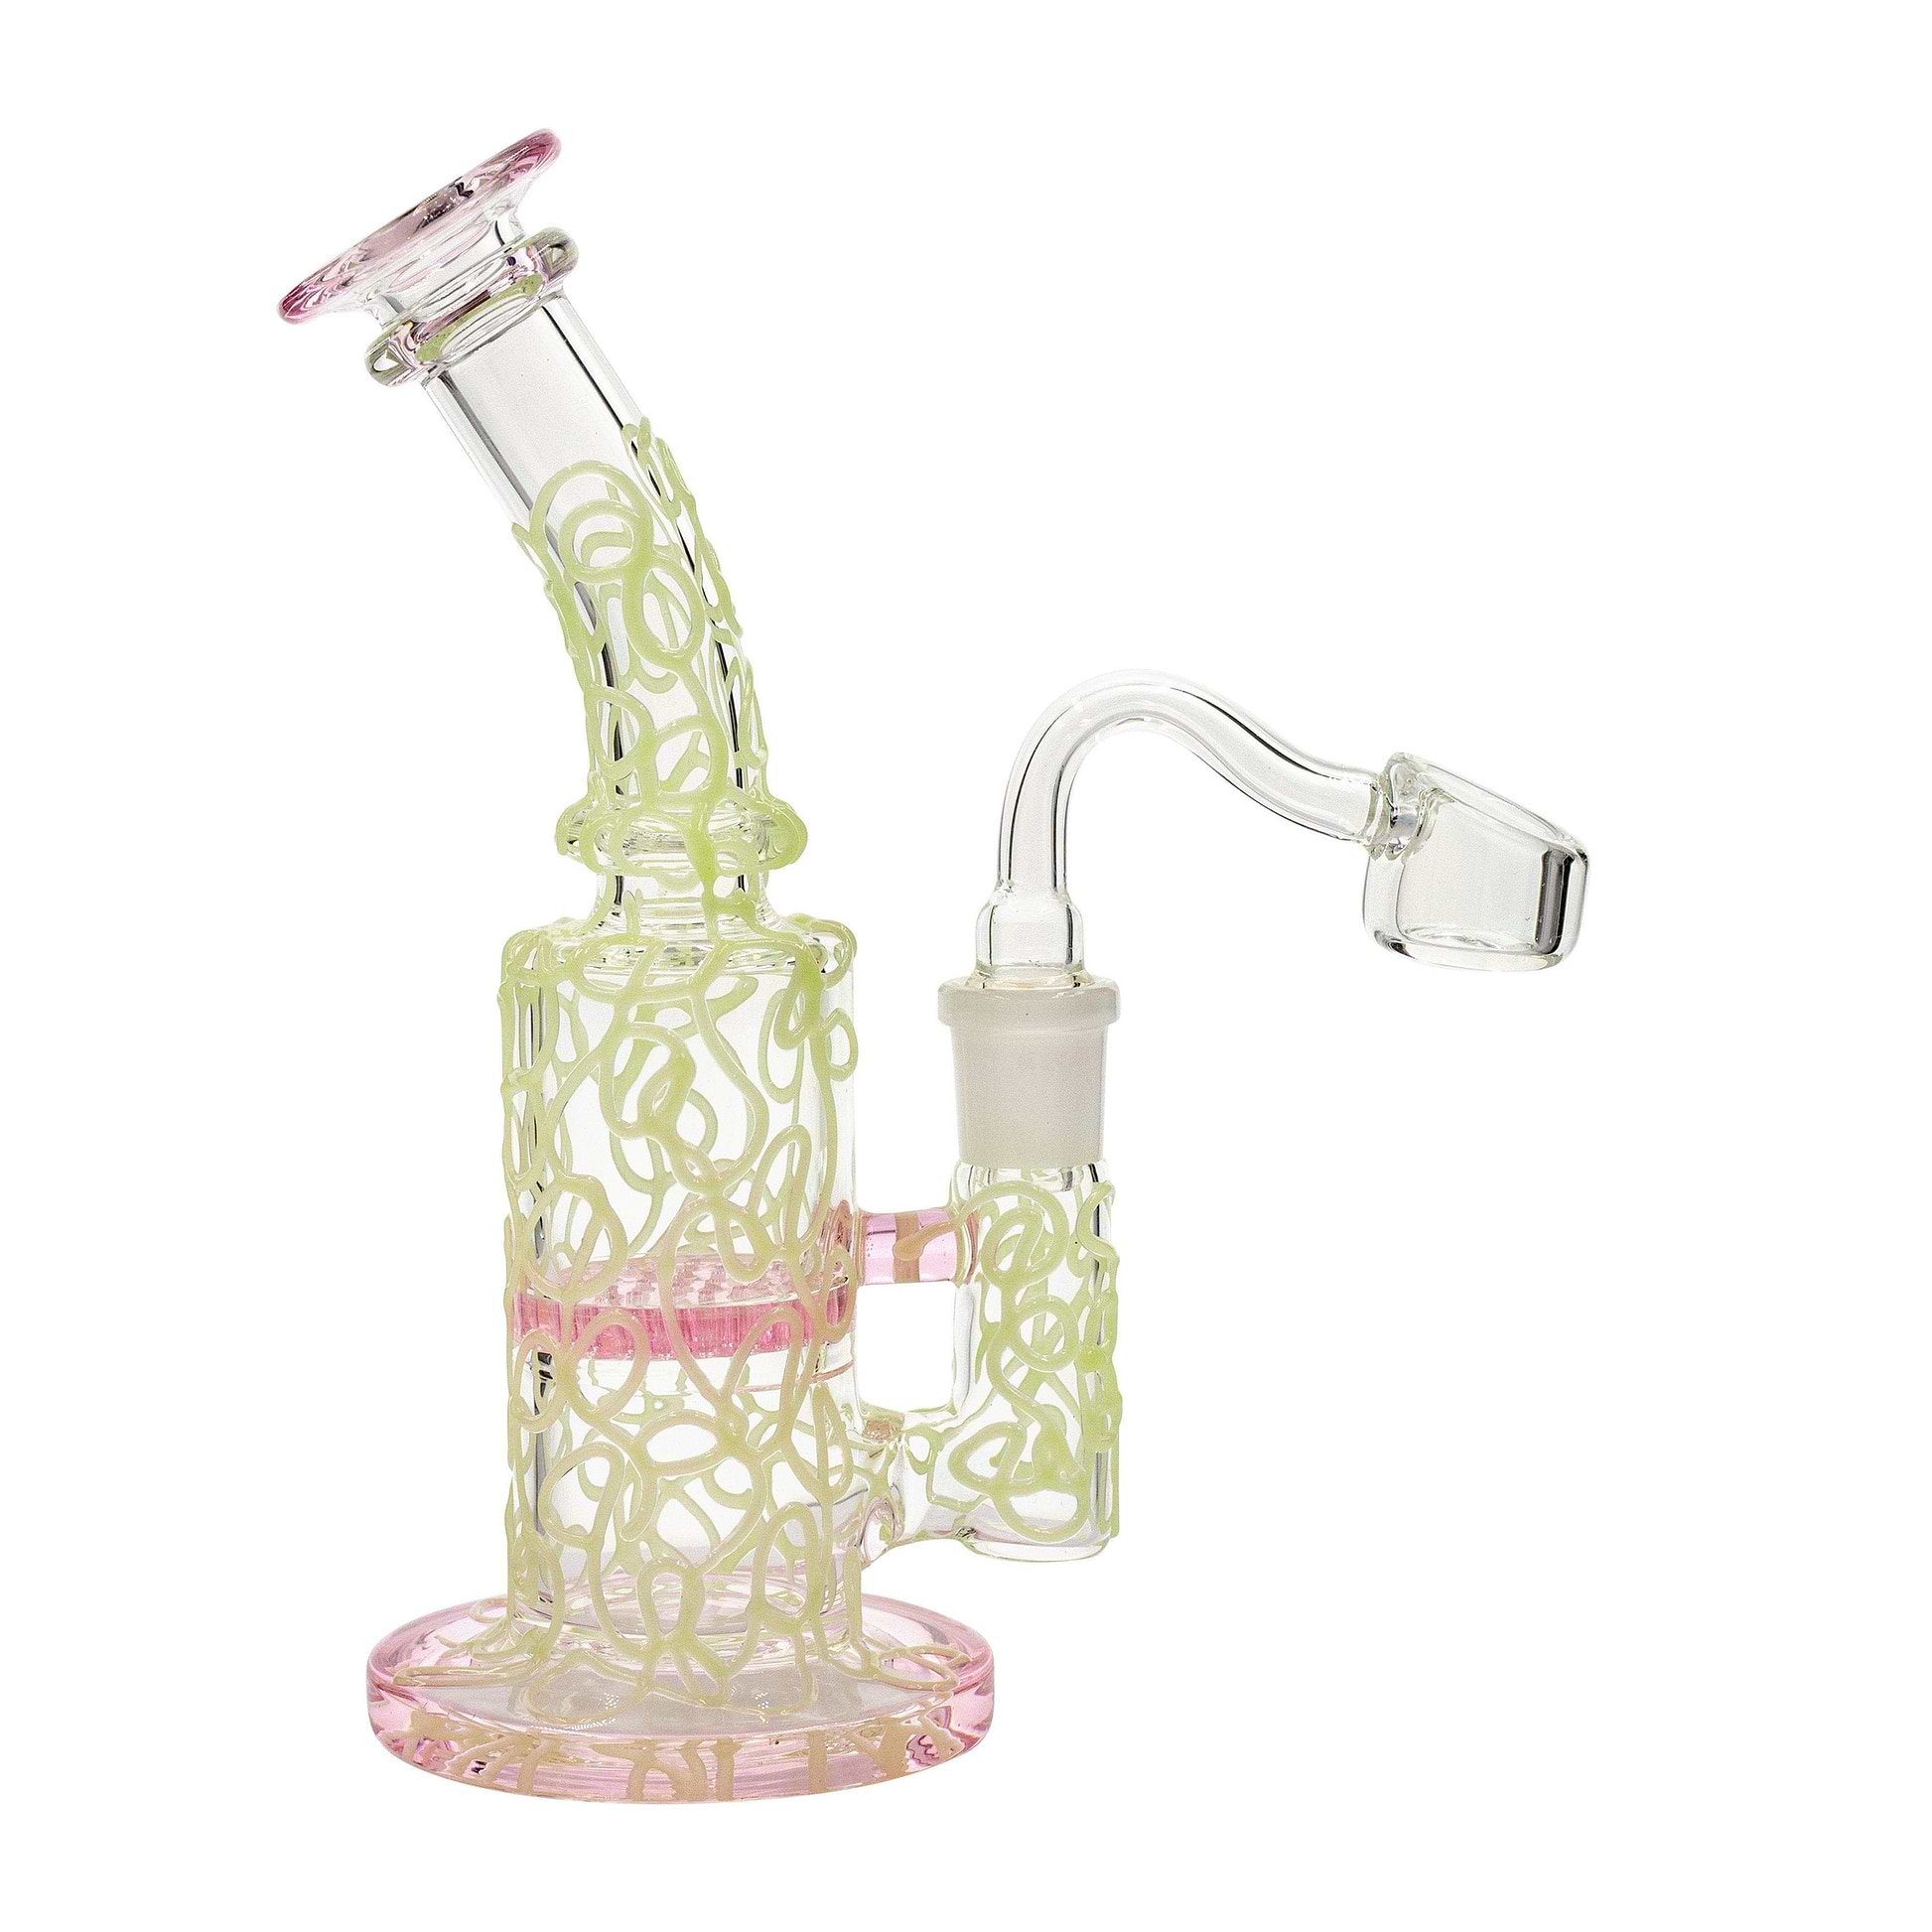 Petite 7-inch glass dab rig smoking device with pink color glow in the dark feature honeycomb perc